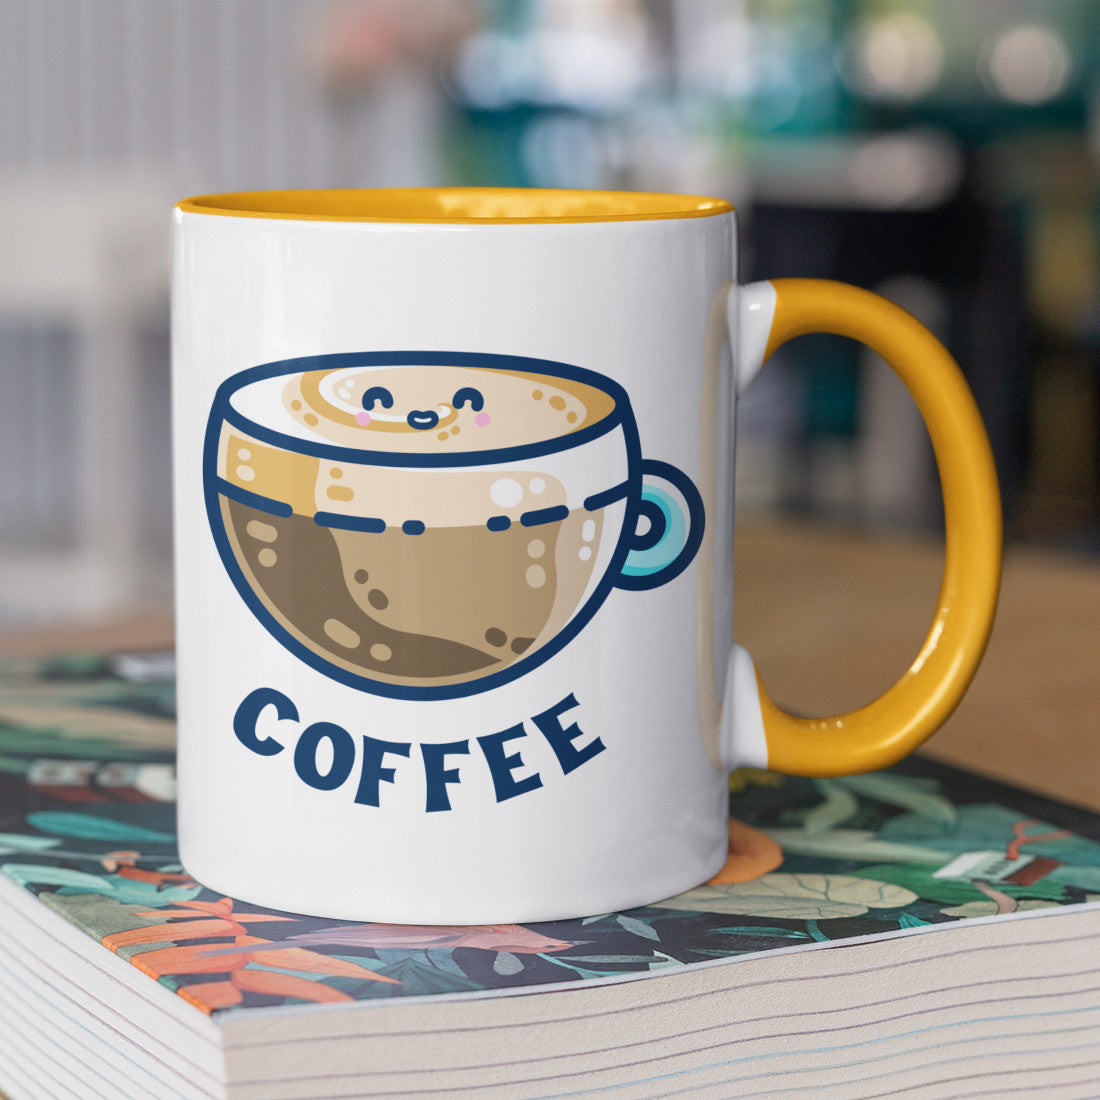 A two toned white and yellow ceramic mug with the handle to the right showing a design of a kawaii cute glass cup of coffee with a thick creamy layer at the top and a smiling face in the cream on the top. The word coffee is in capital letters beneath.